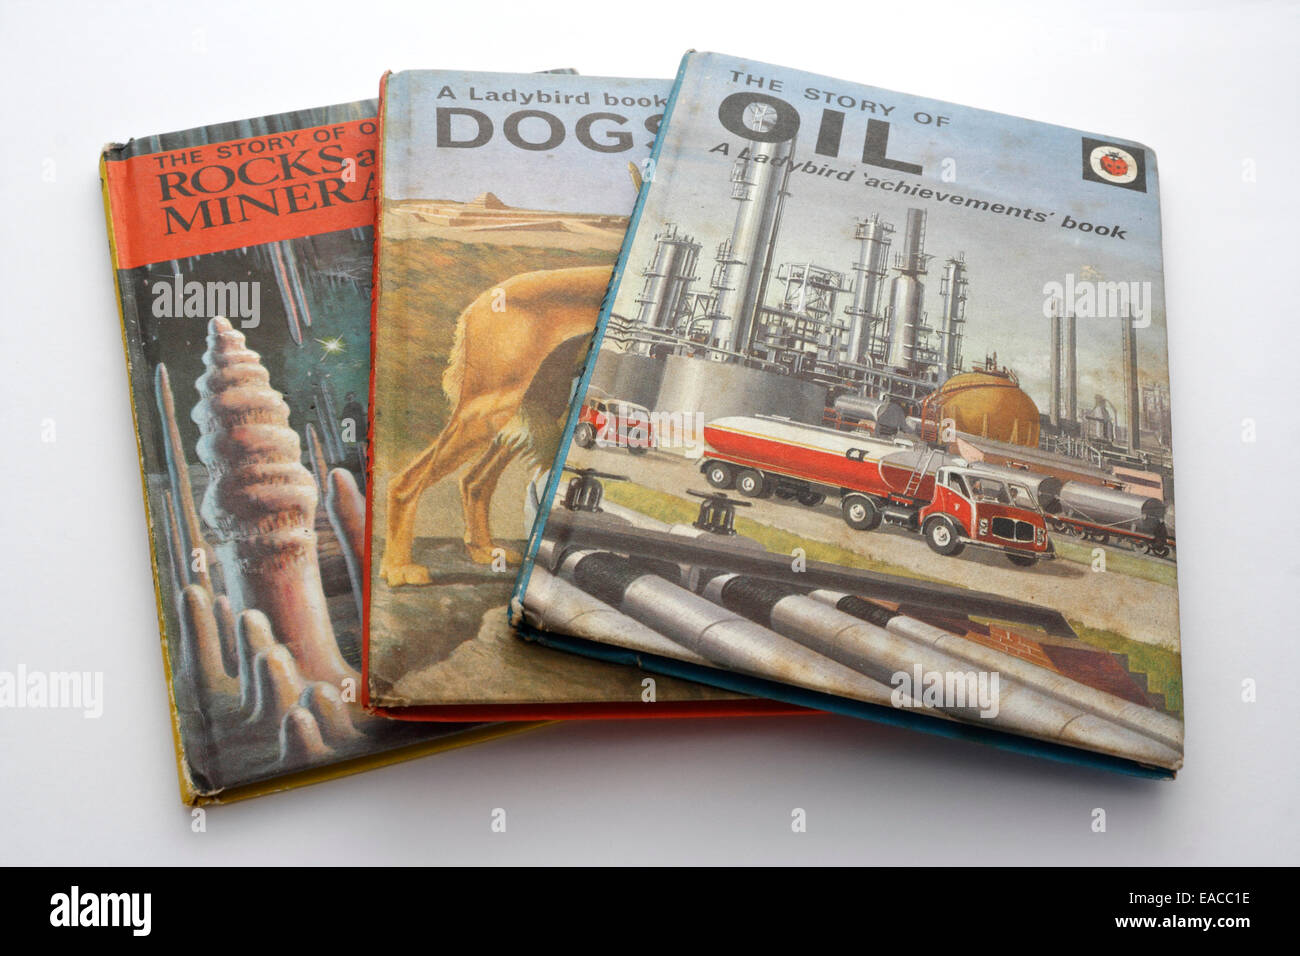 Ladybird Books selection. Children's educational learning Stock Photo